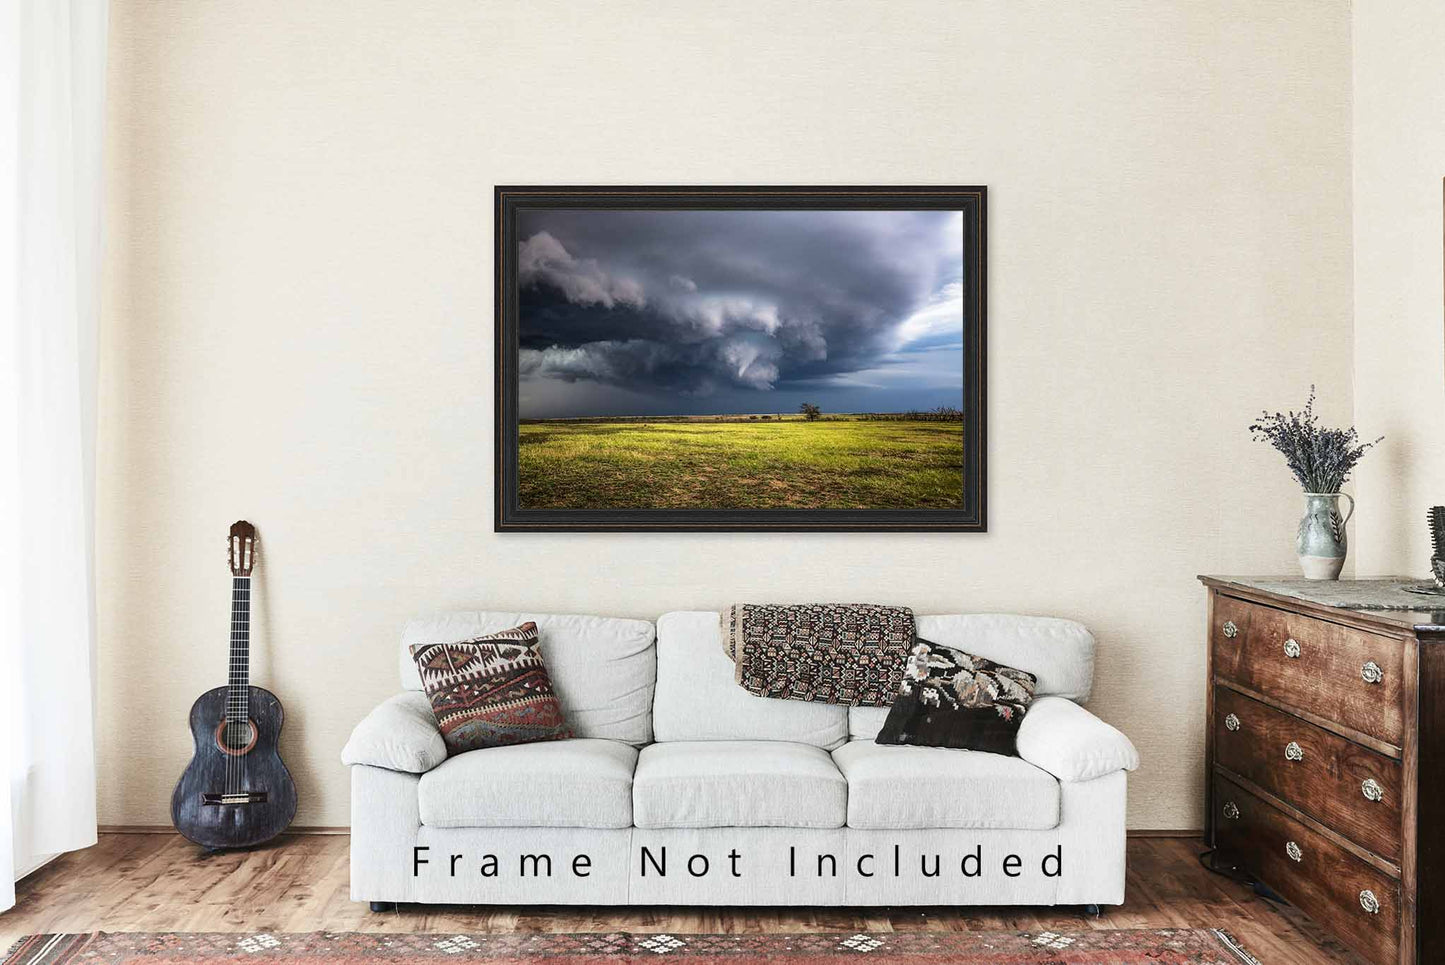 Storm Photography Print - Picture of Funnel Cloud Over Open Field on Stormy Day in Oklahoma Tornado Wall Art Weather Decor